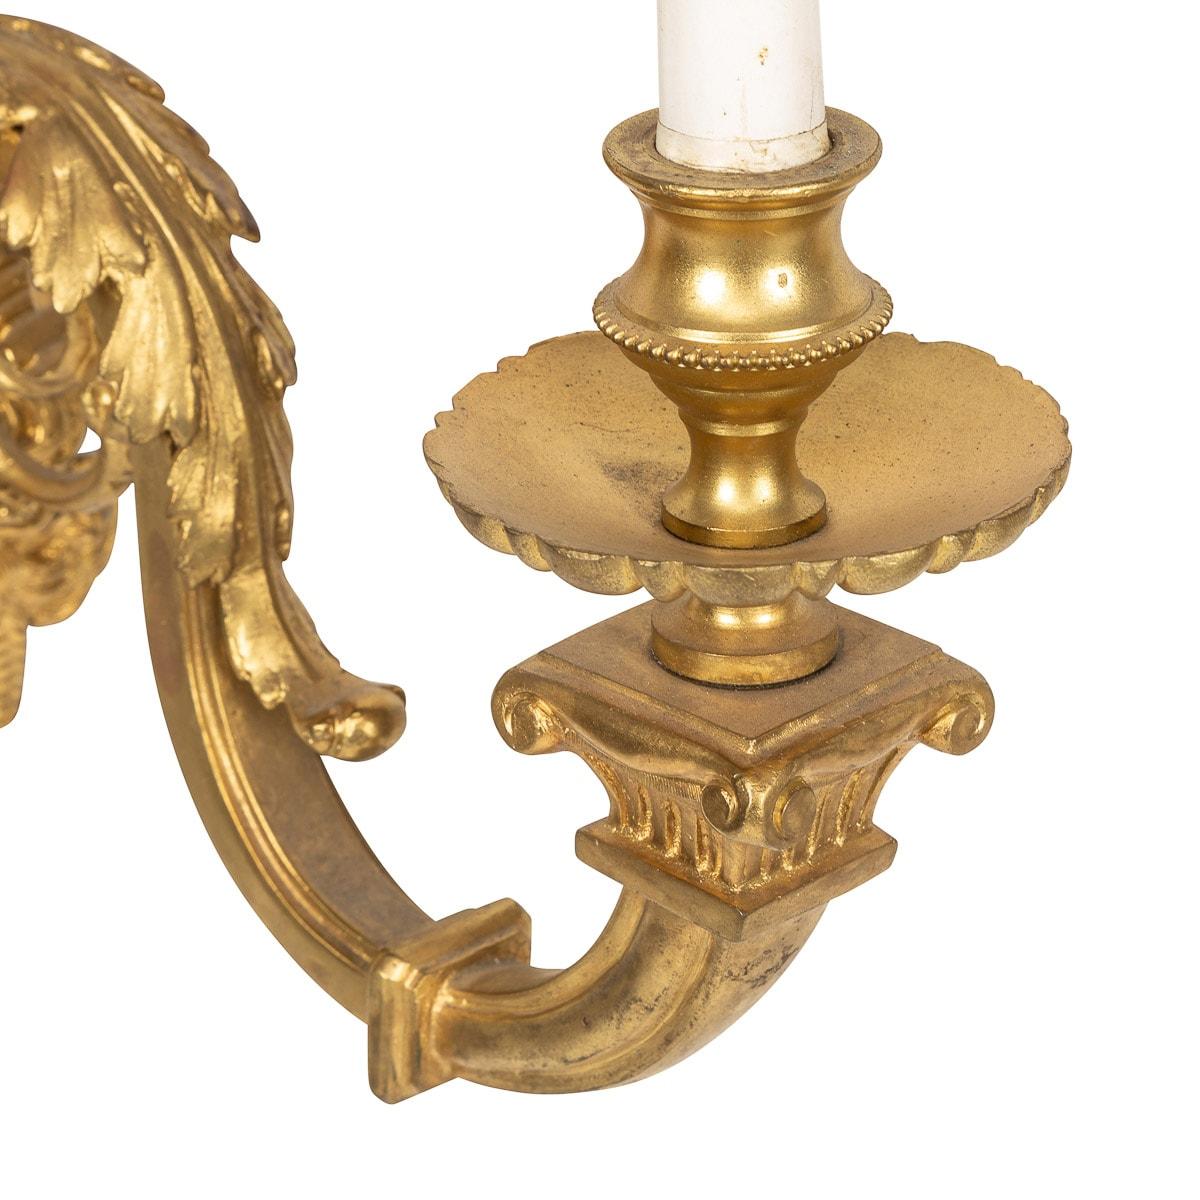 19th Century French Régence Style Ormolu D'appliques Wall Lights, C.1830 In Good Condition For Sale In Royal Tunbridge Wells, Kent